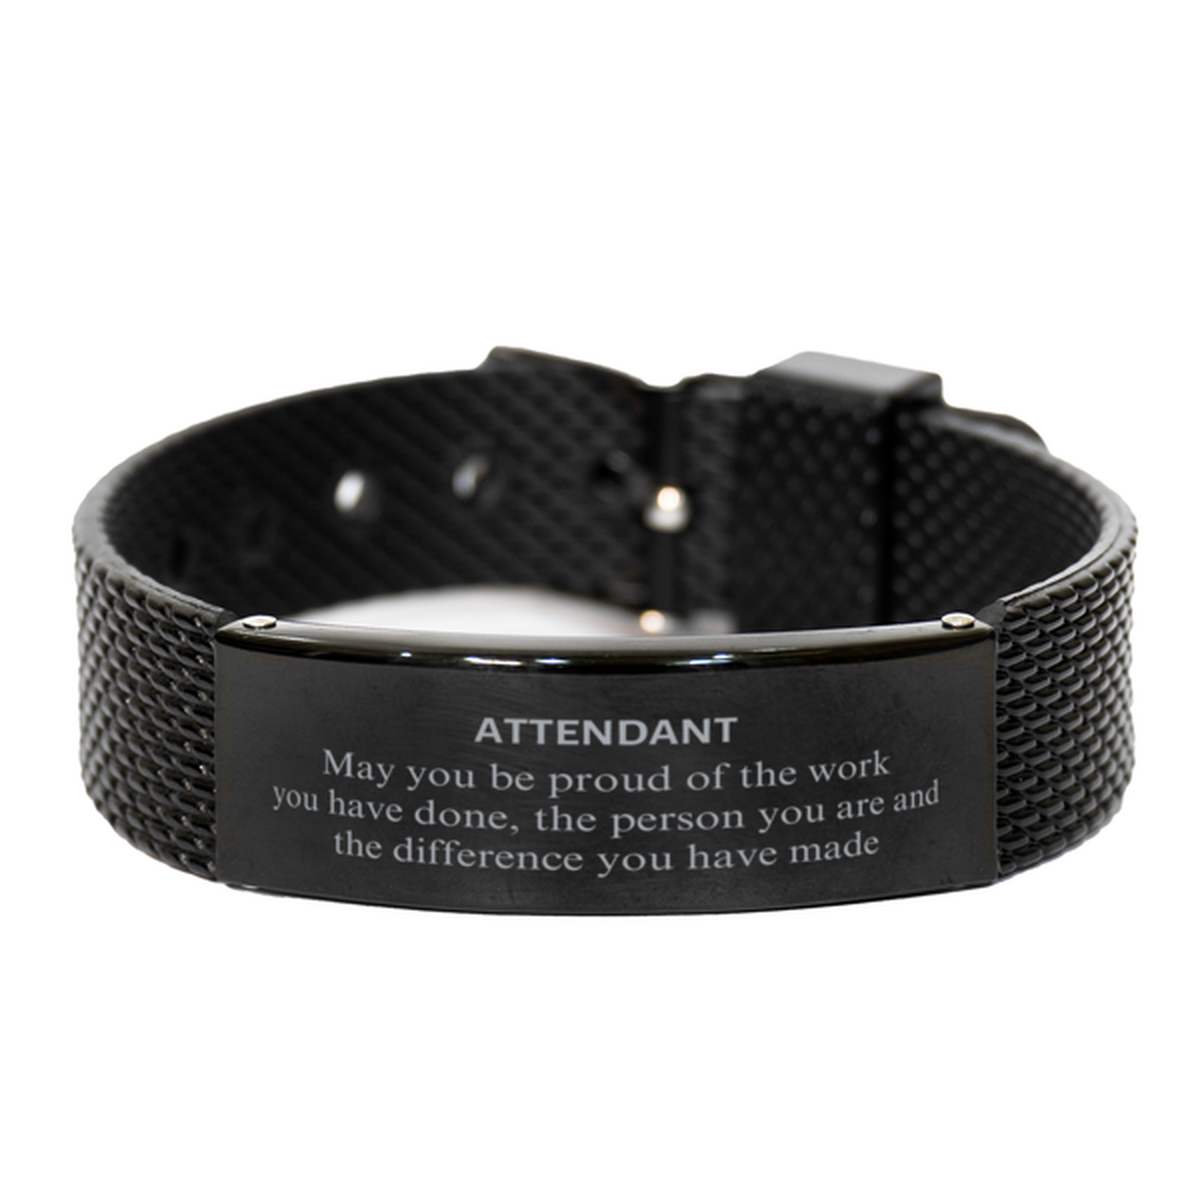 Attendant May you be proud of the work you have done, Retirement Attendant Black Shark Mesh Bracelet for Colleague Appreciation Gifts Amazing for Attendant